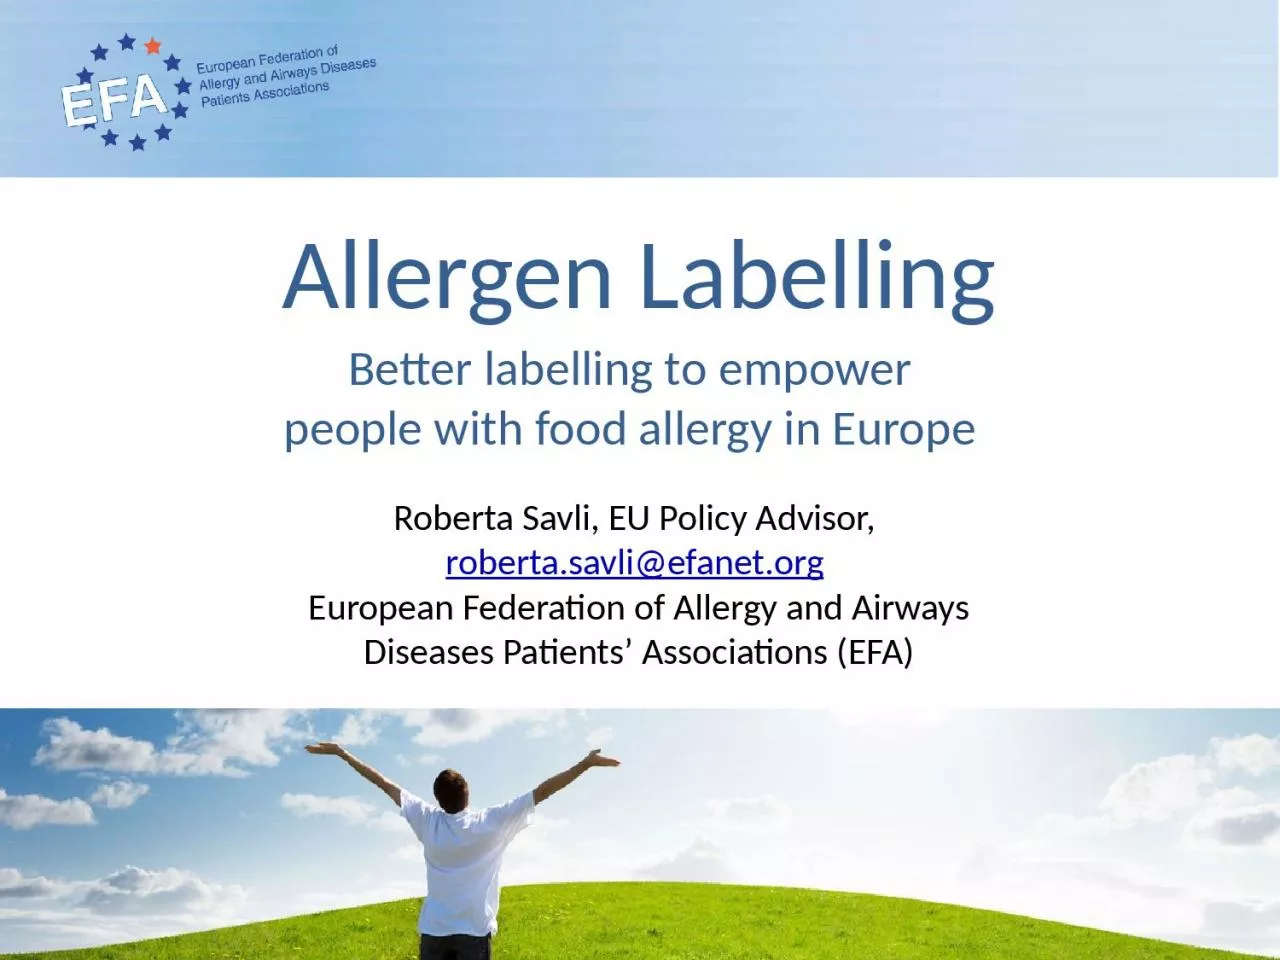 Allergen Labelling Better labelling to empower people with food allergy in